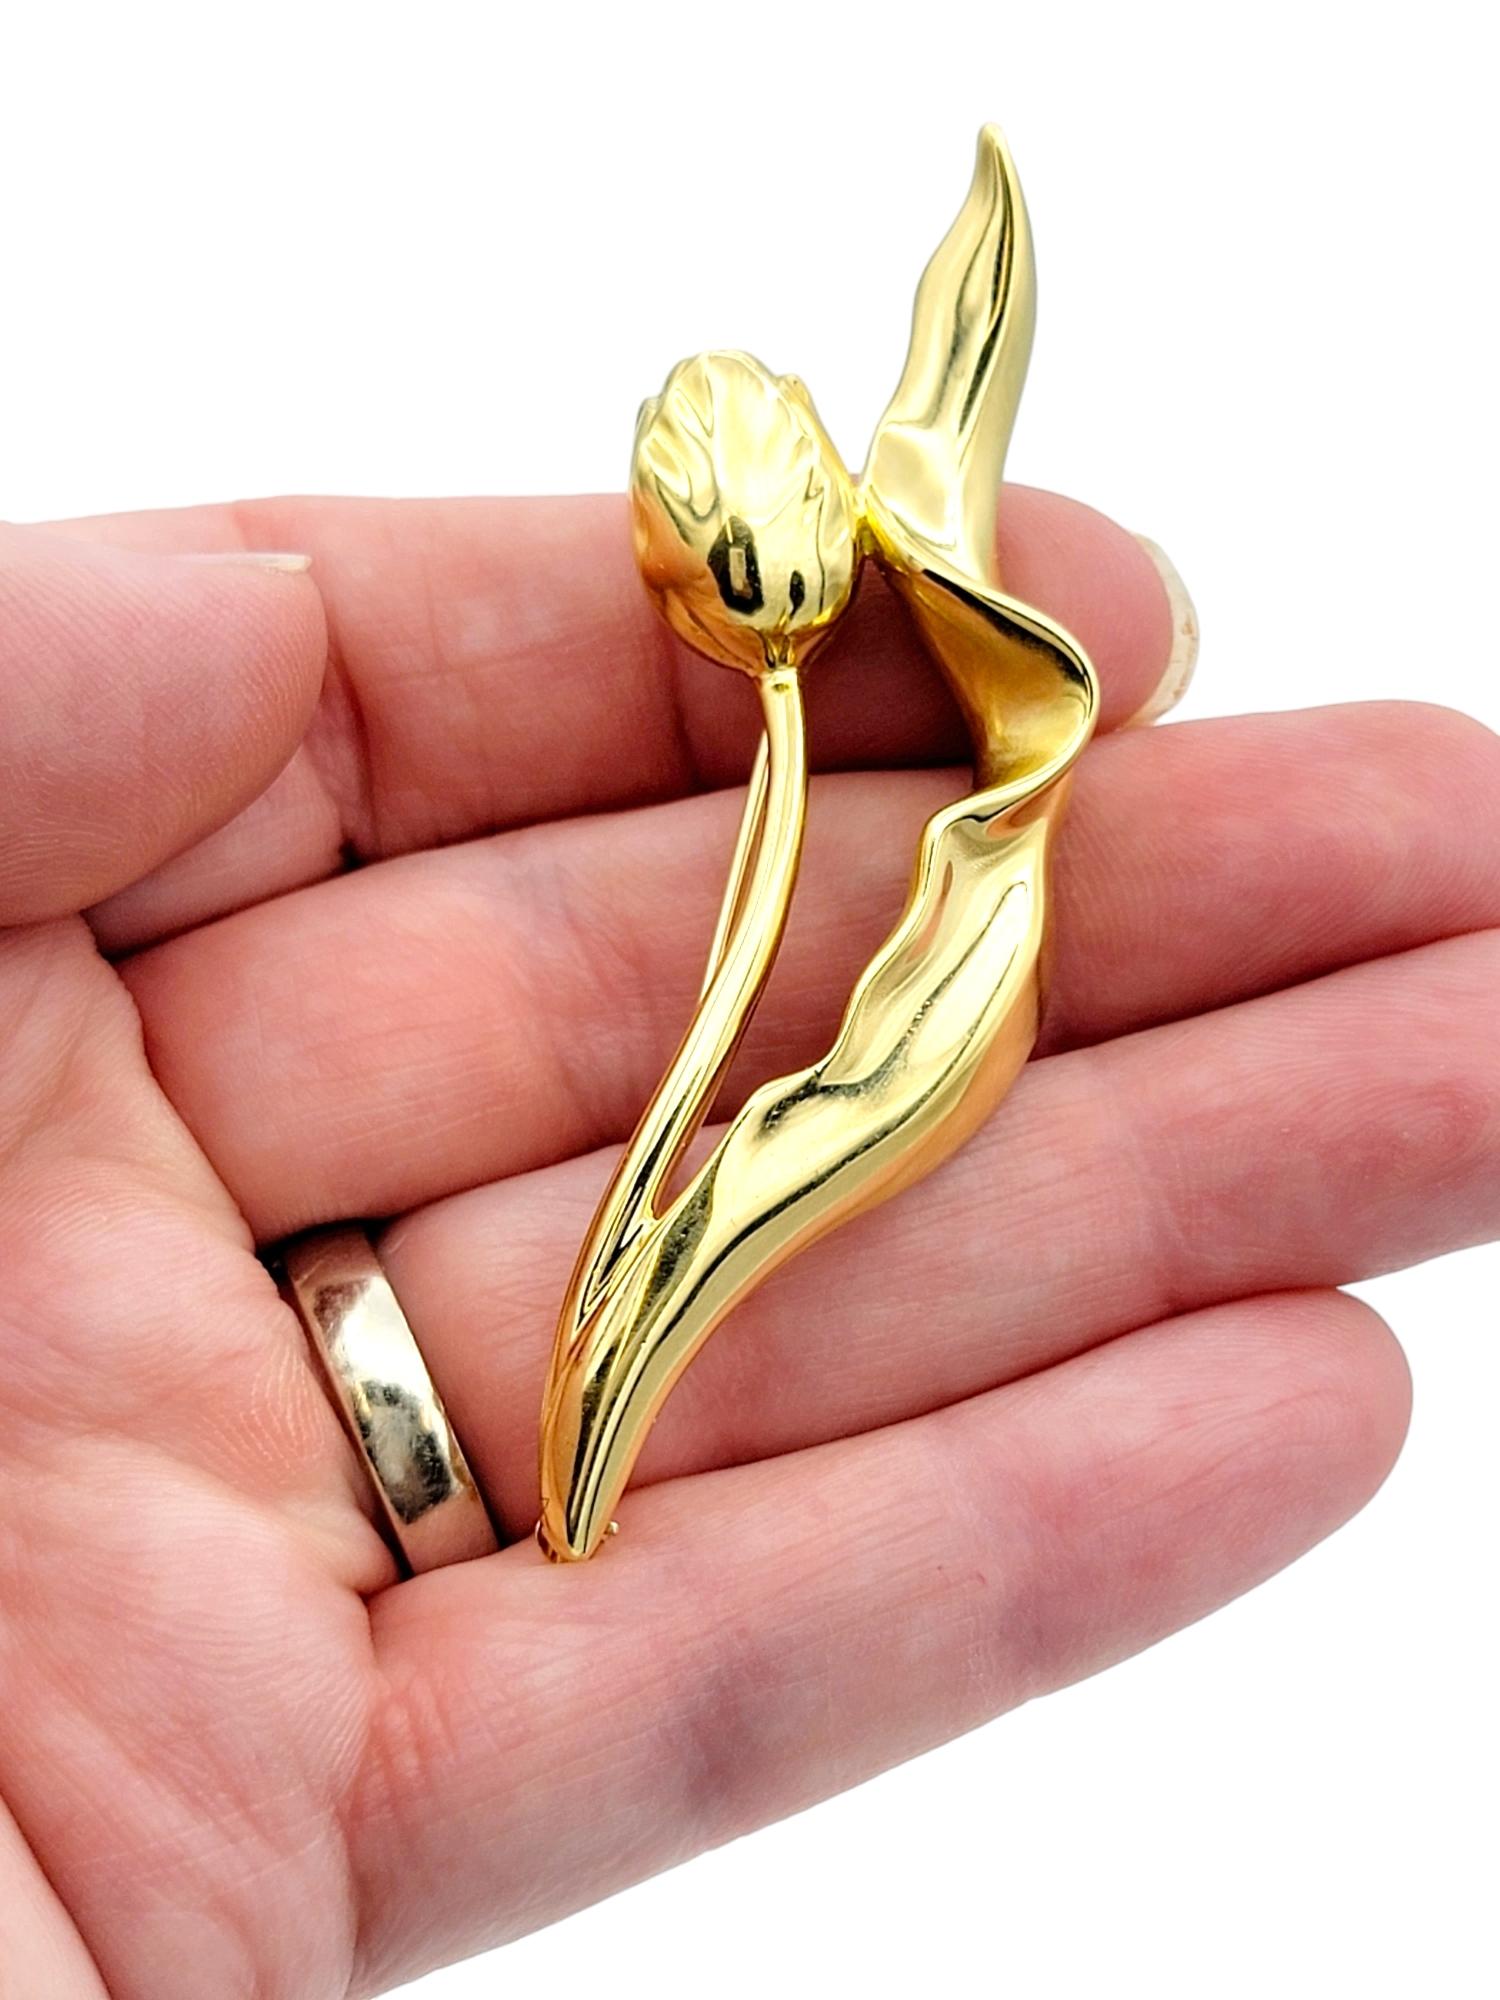 Vintage 1984 Tiffany & Co. Tulip Brooch / Pin in Polished 18 Karat Yellow Gold For Sale 3